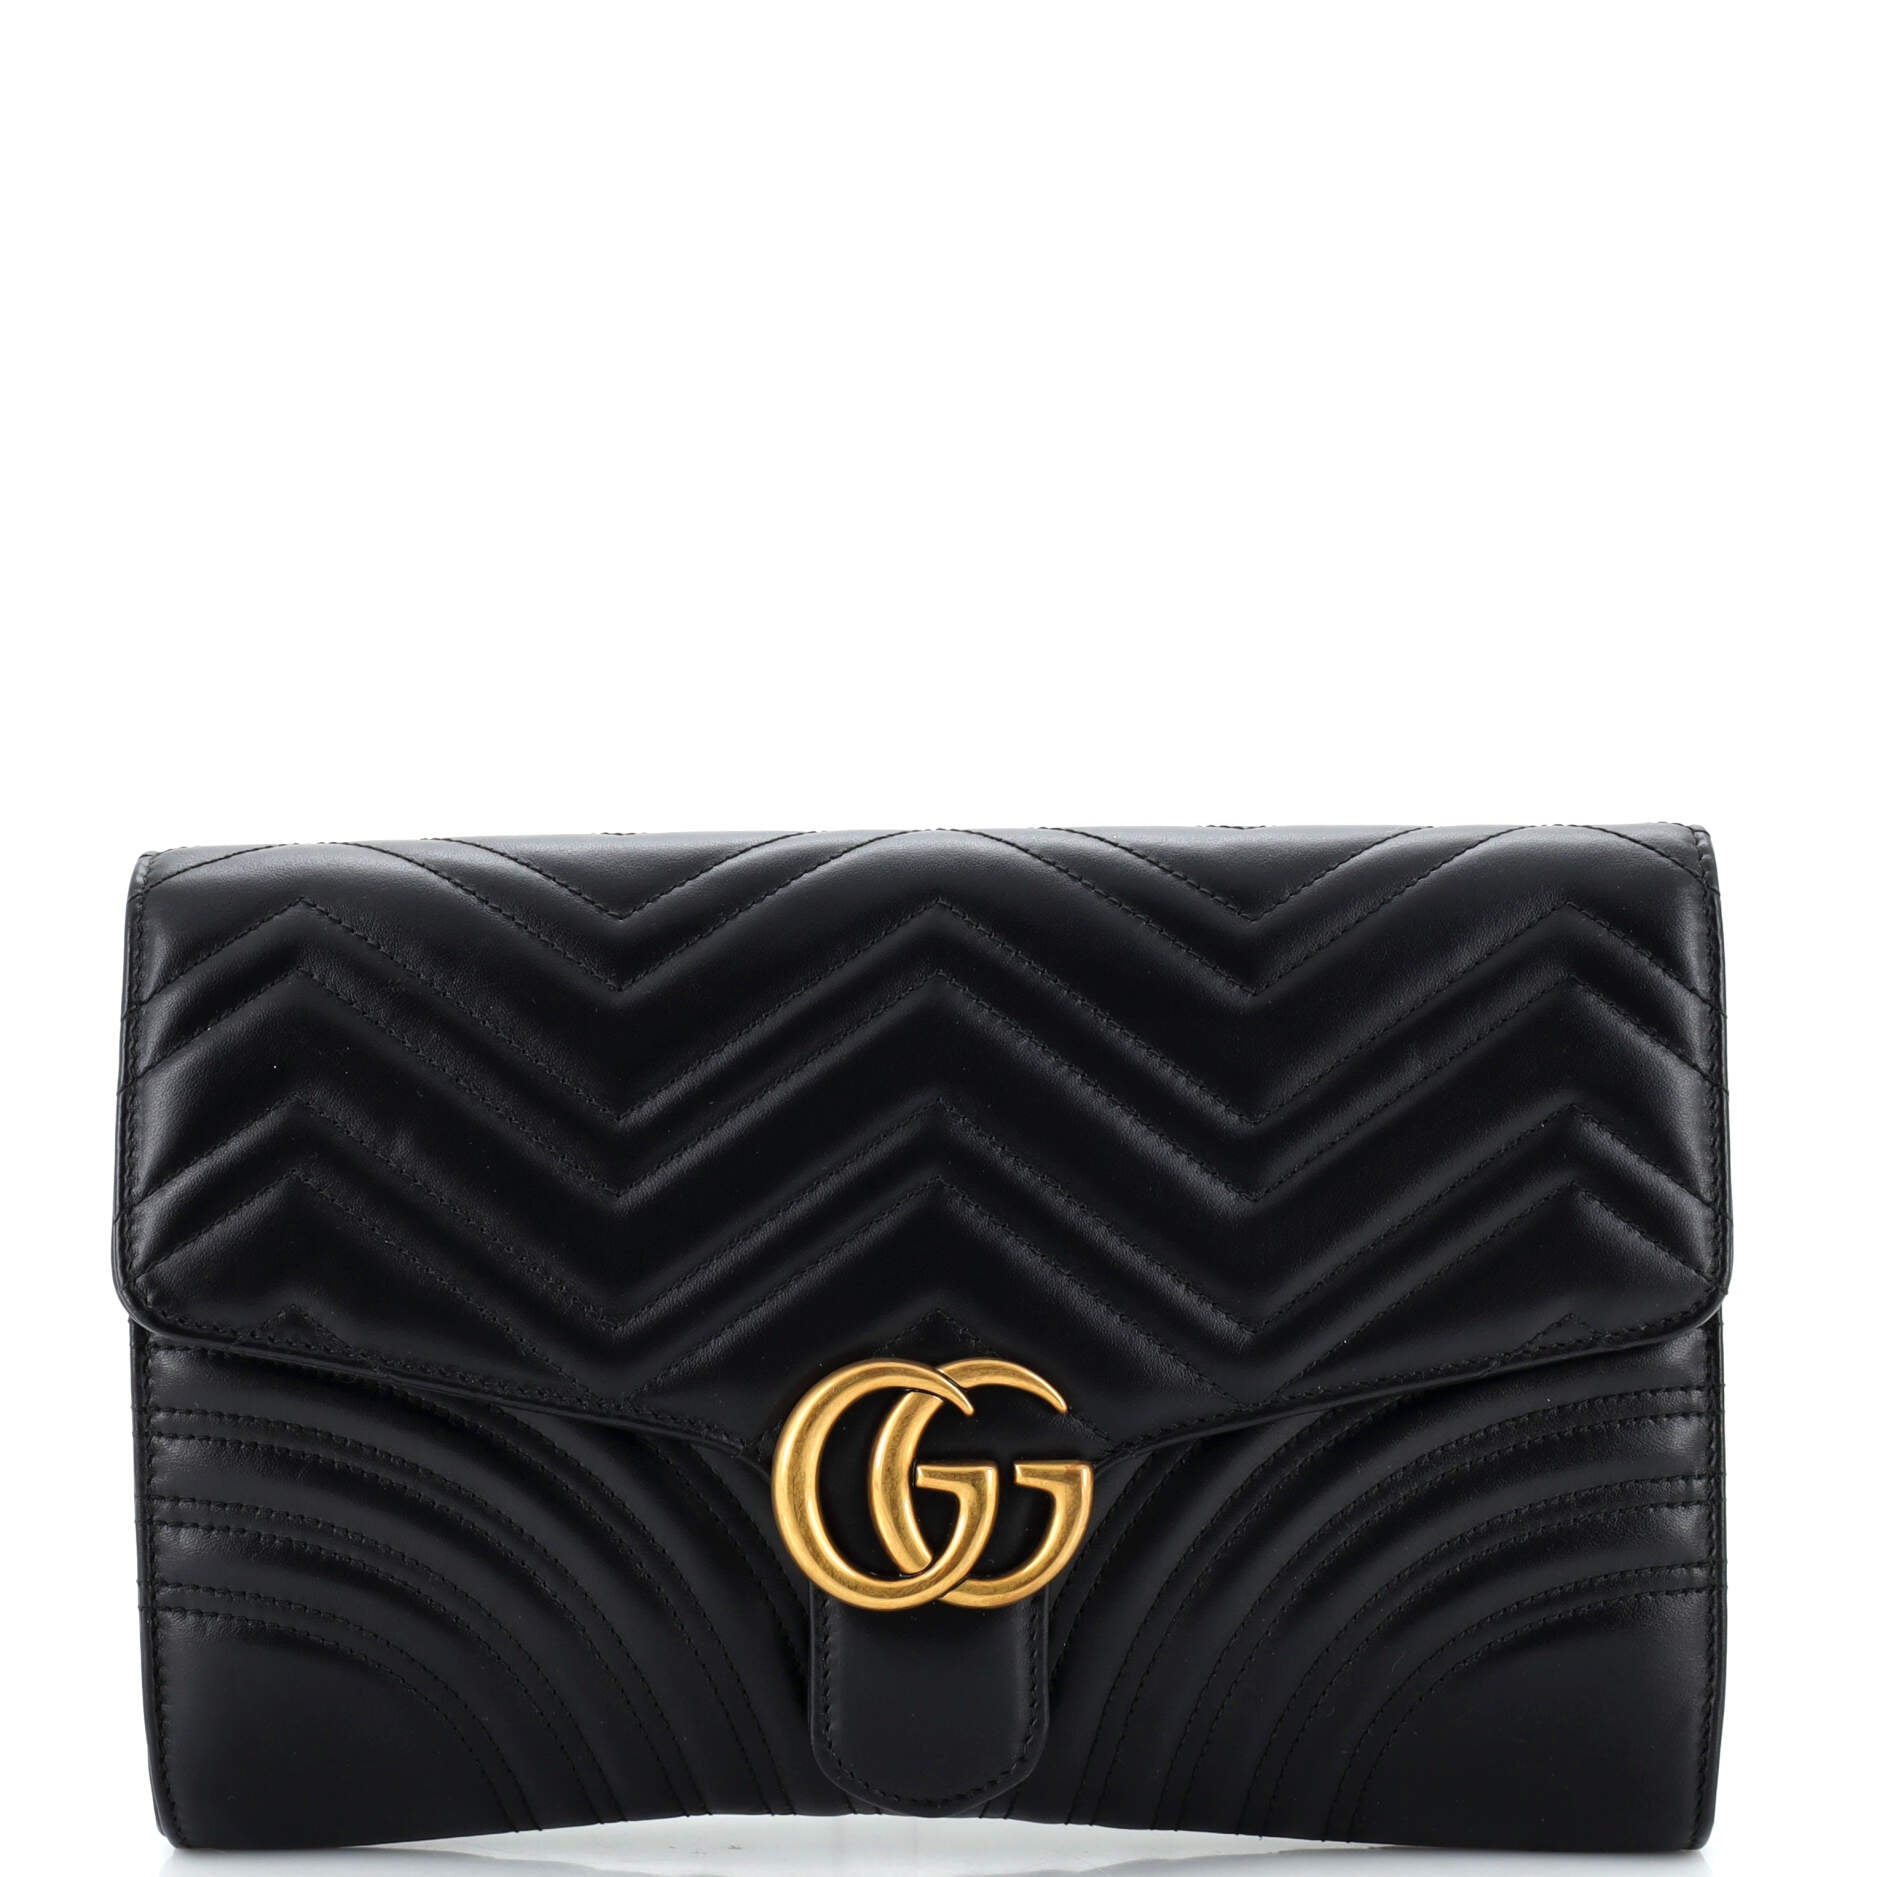 GG Marmont Flap Clutch Matelasse Leather